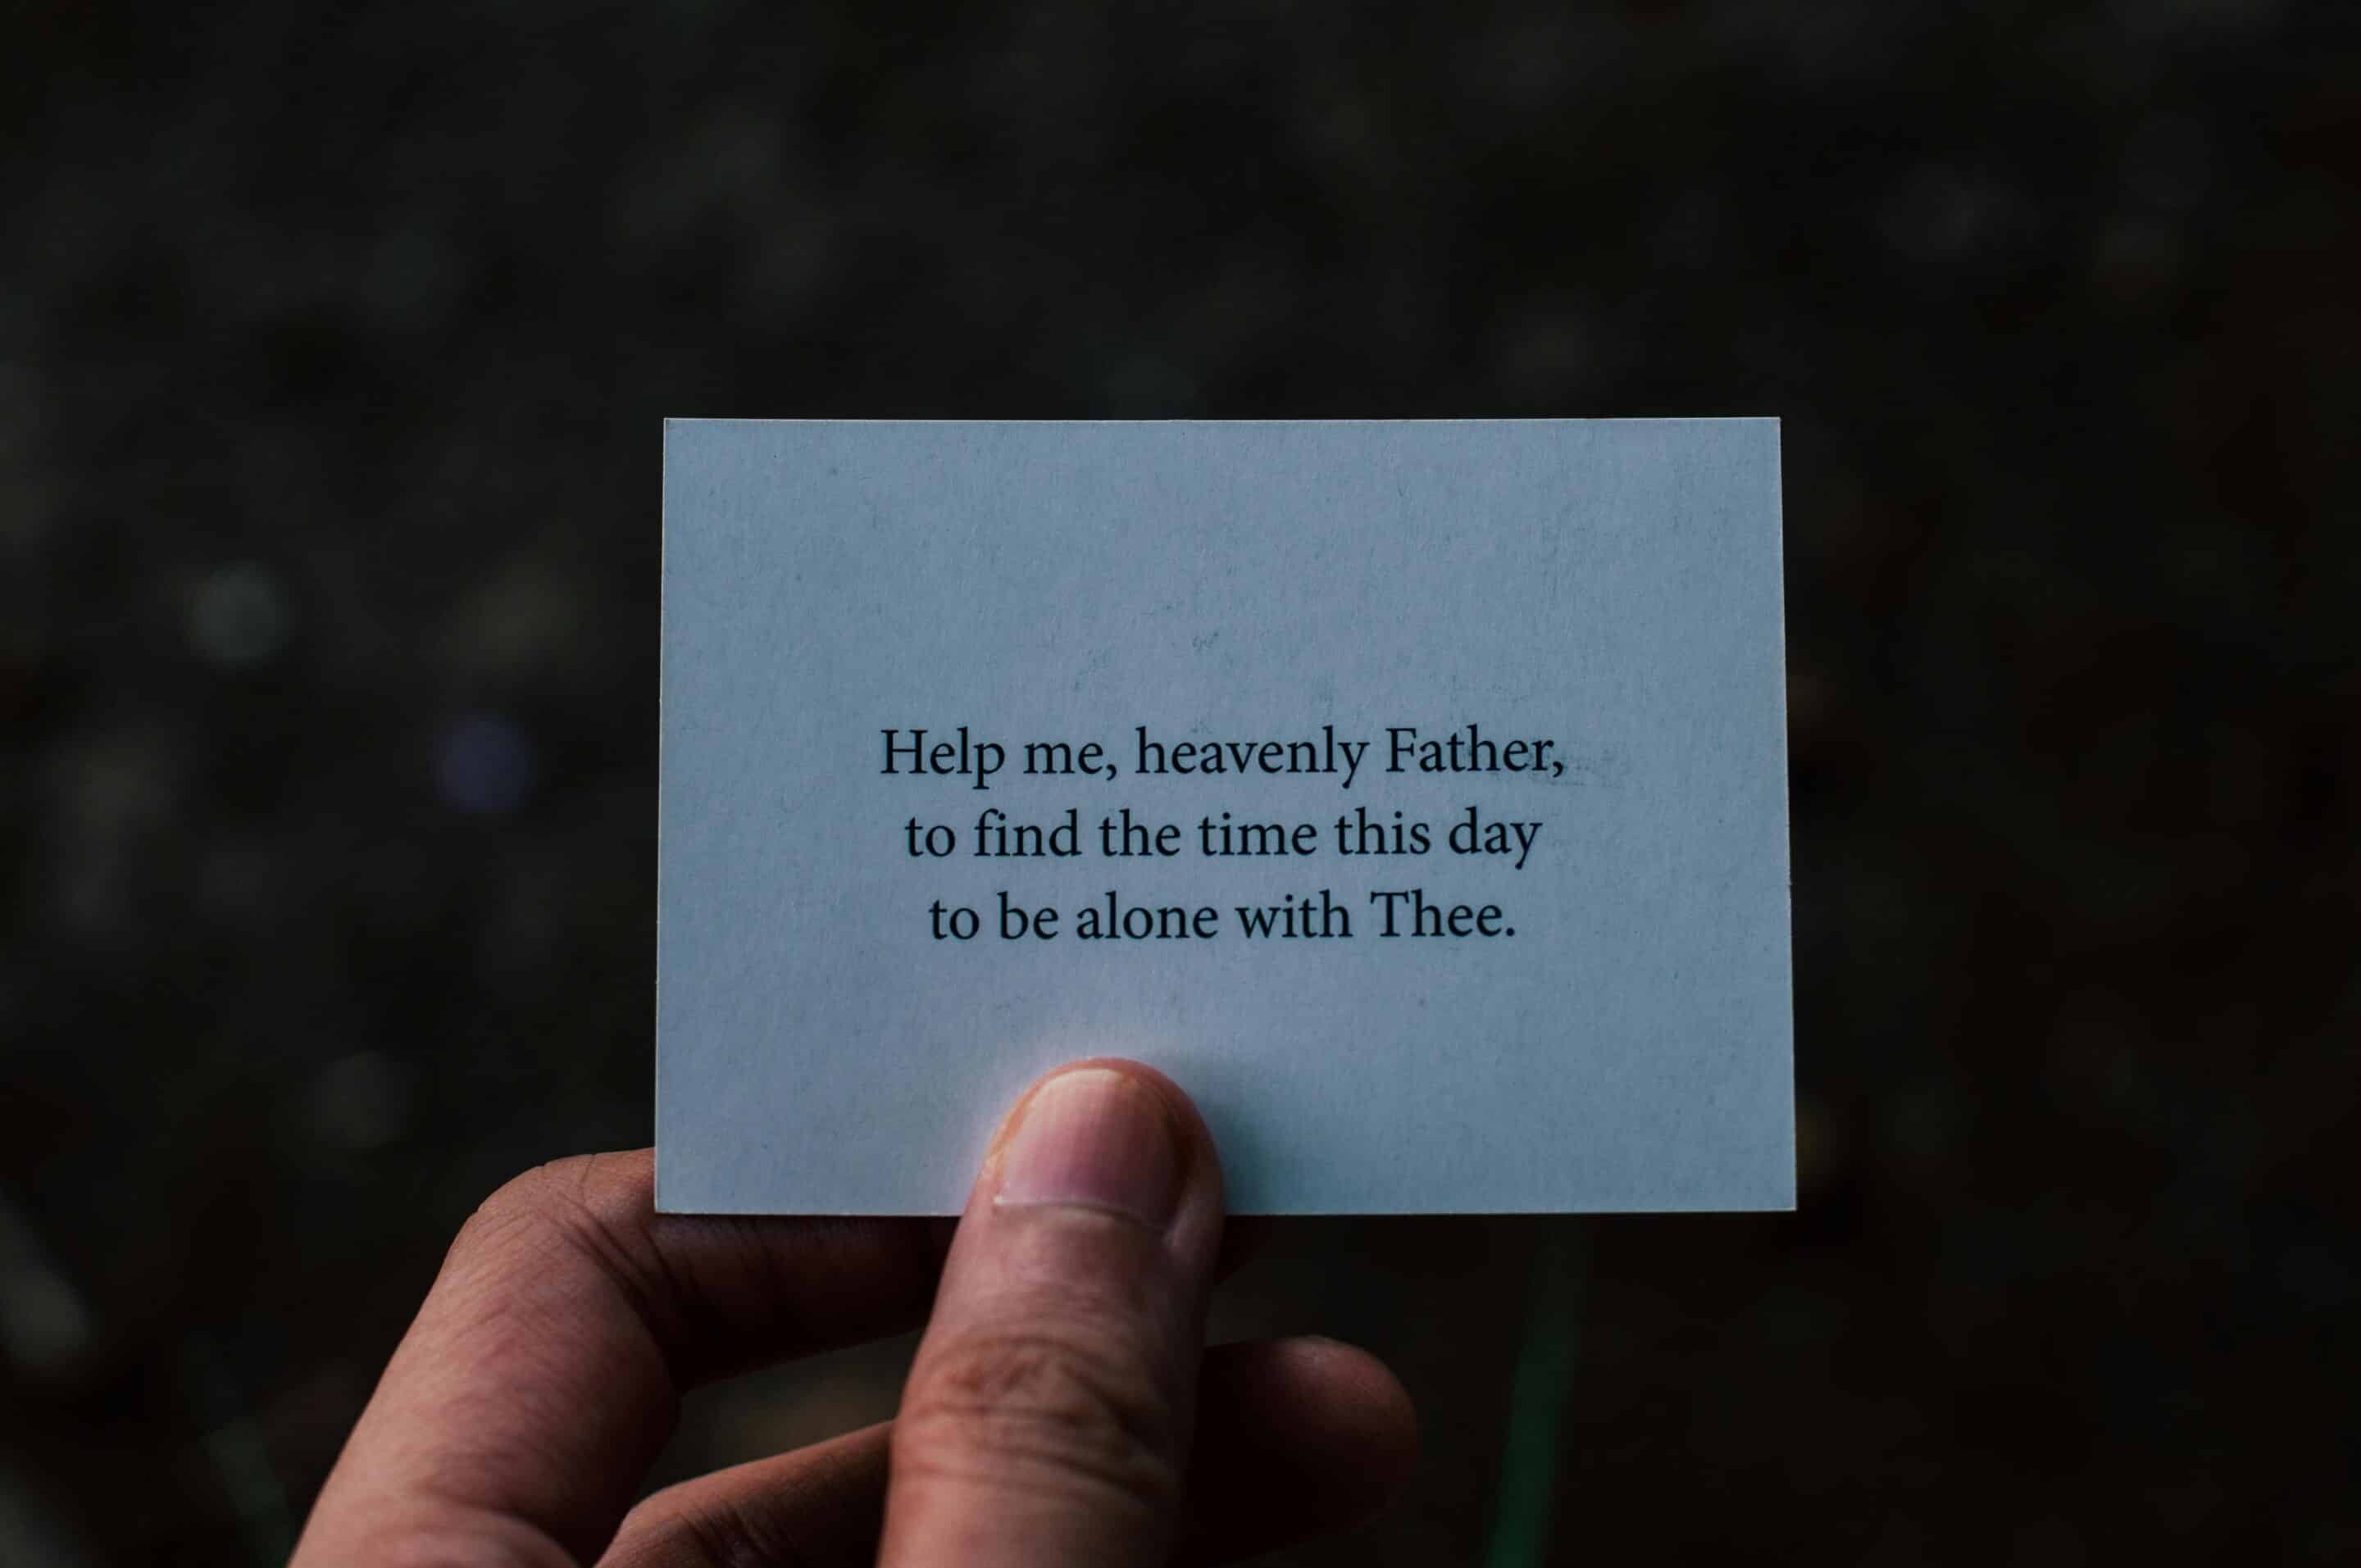 Help me heavenly Father to find the time today to be alone with thee.